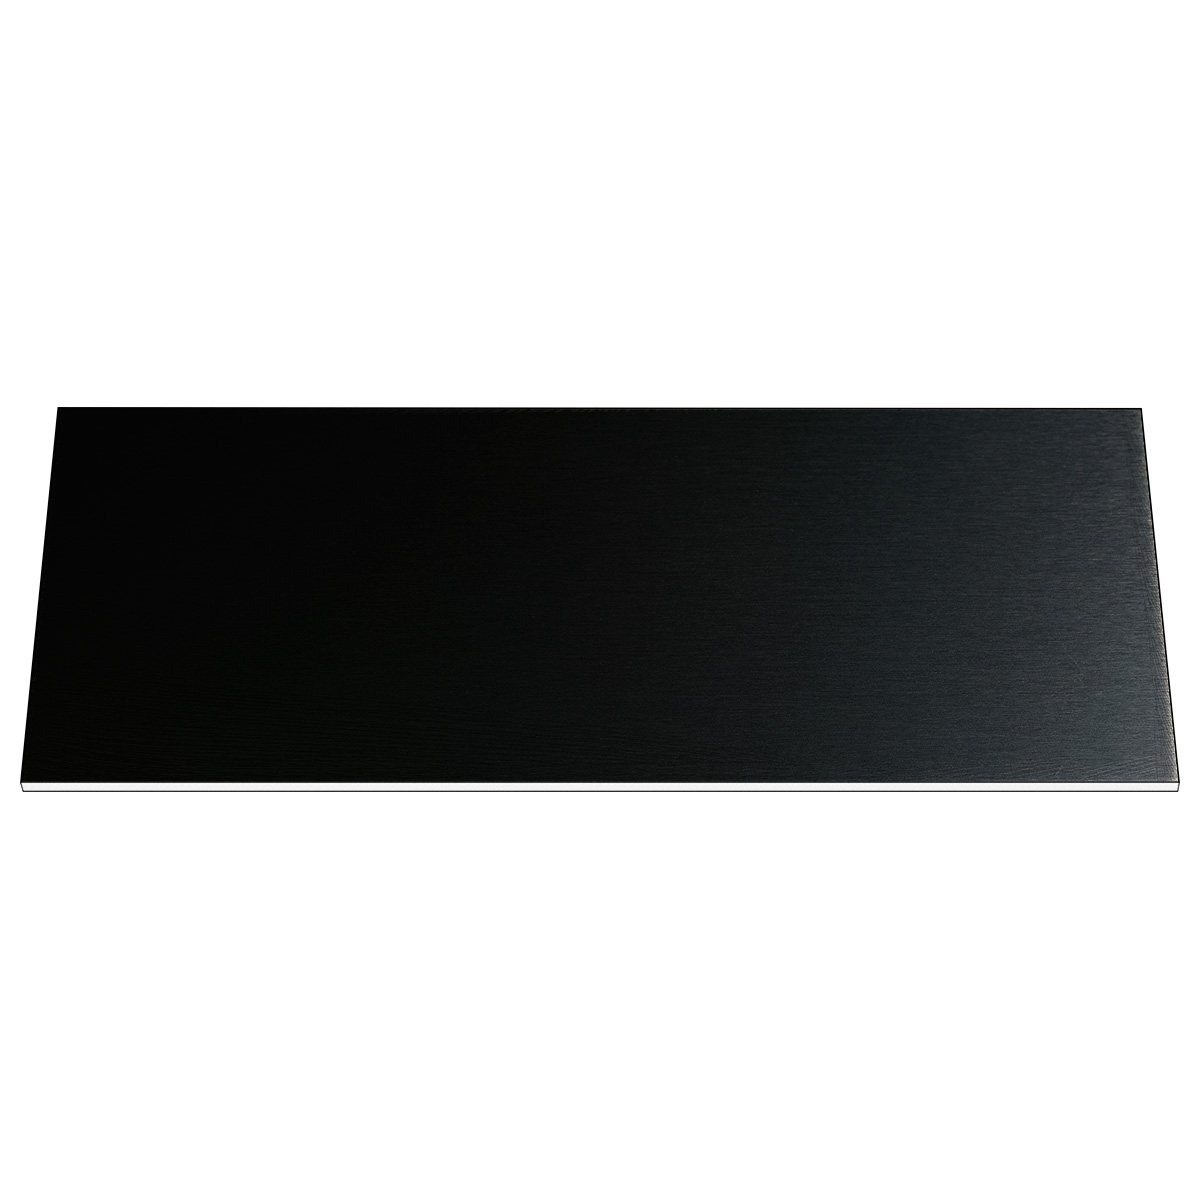 Engraving plate, Resopal, black, rectangular, 100 x 40 mm, 1,5 mm thick, with adhesive